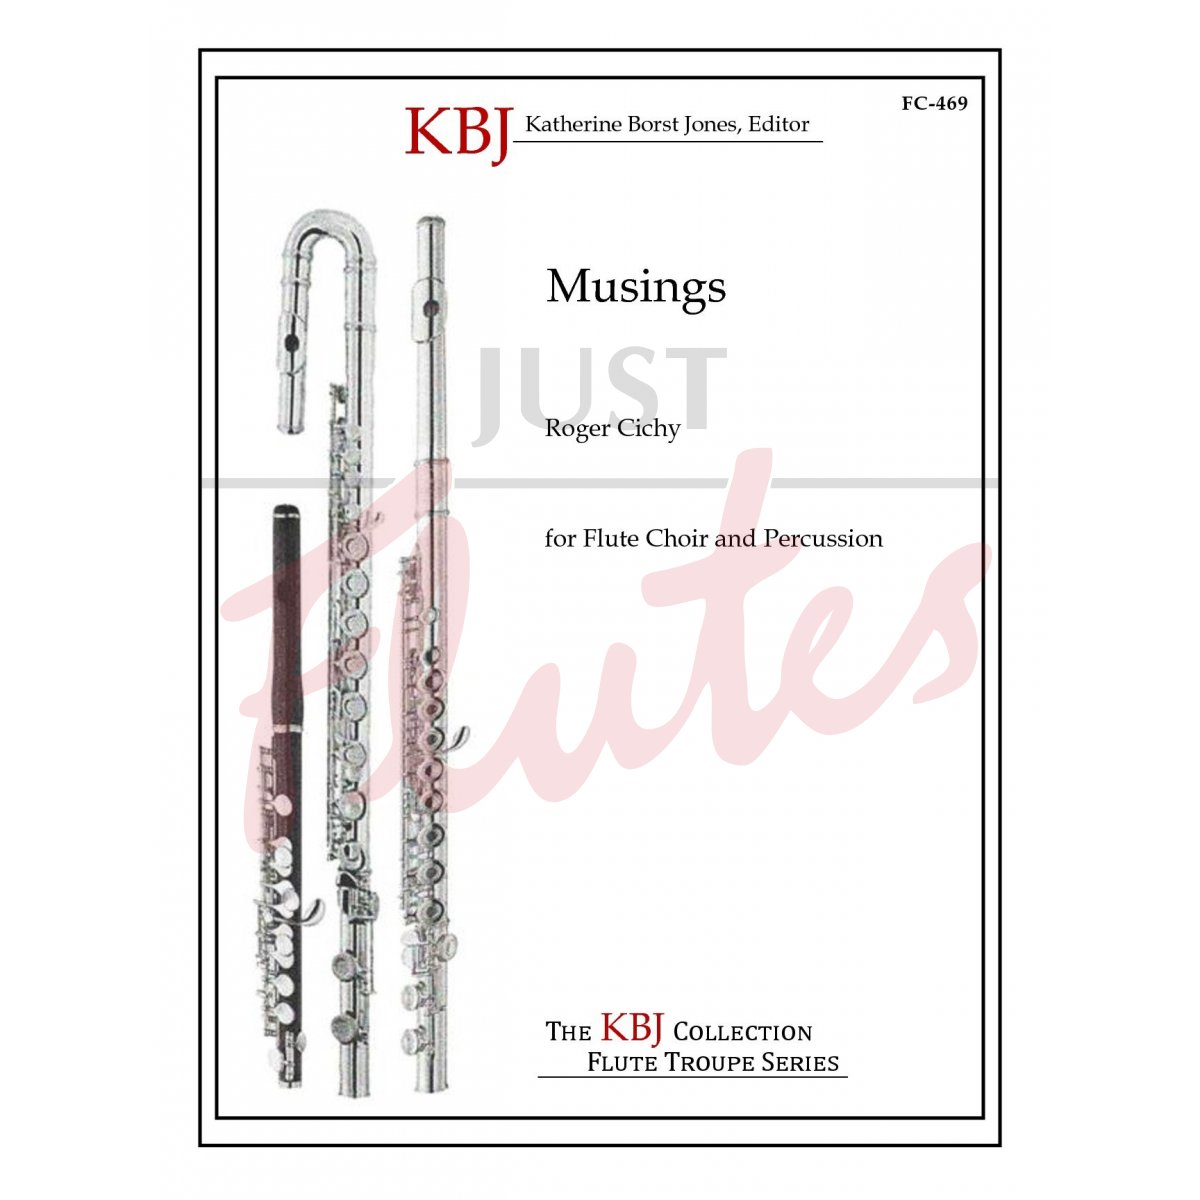 Musings for Flute Choir and Percussion